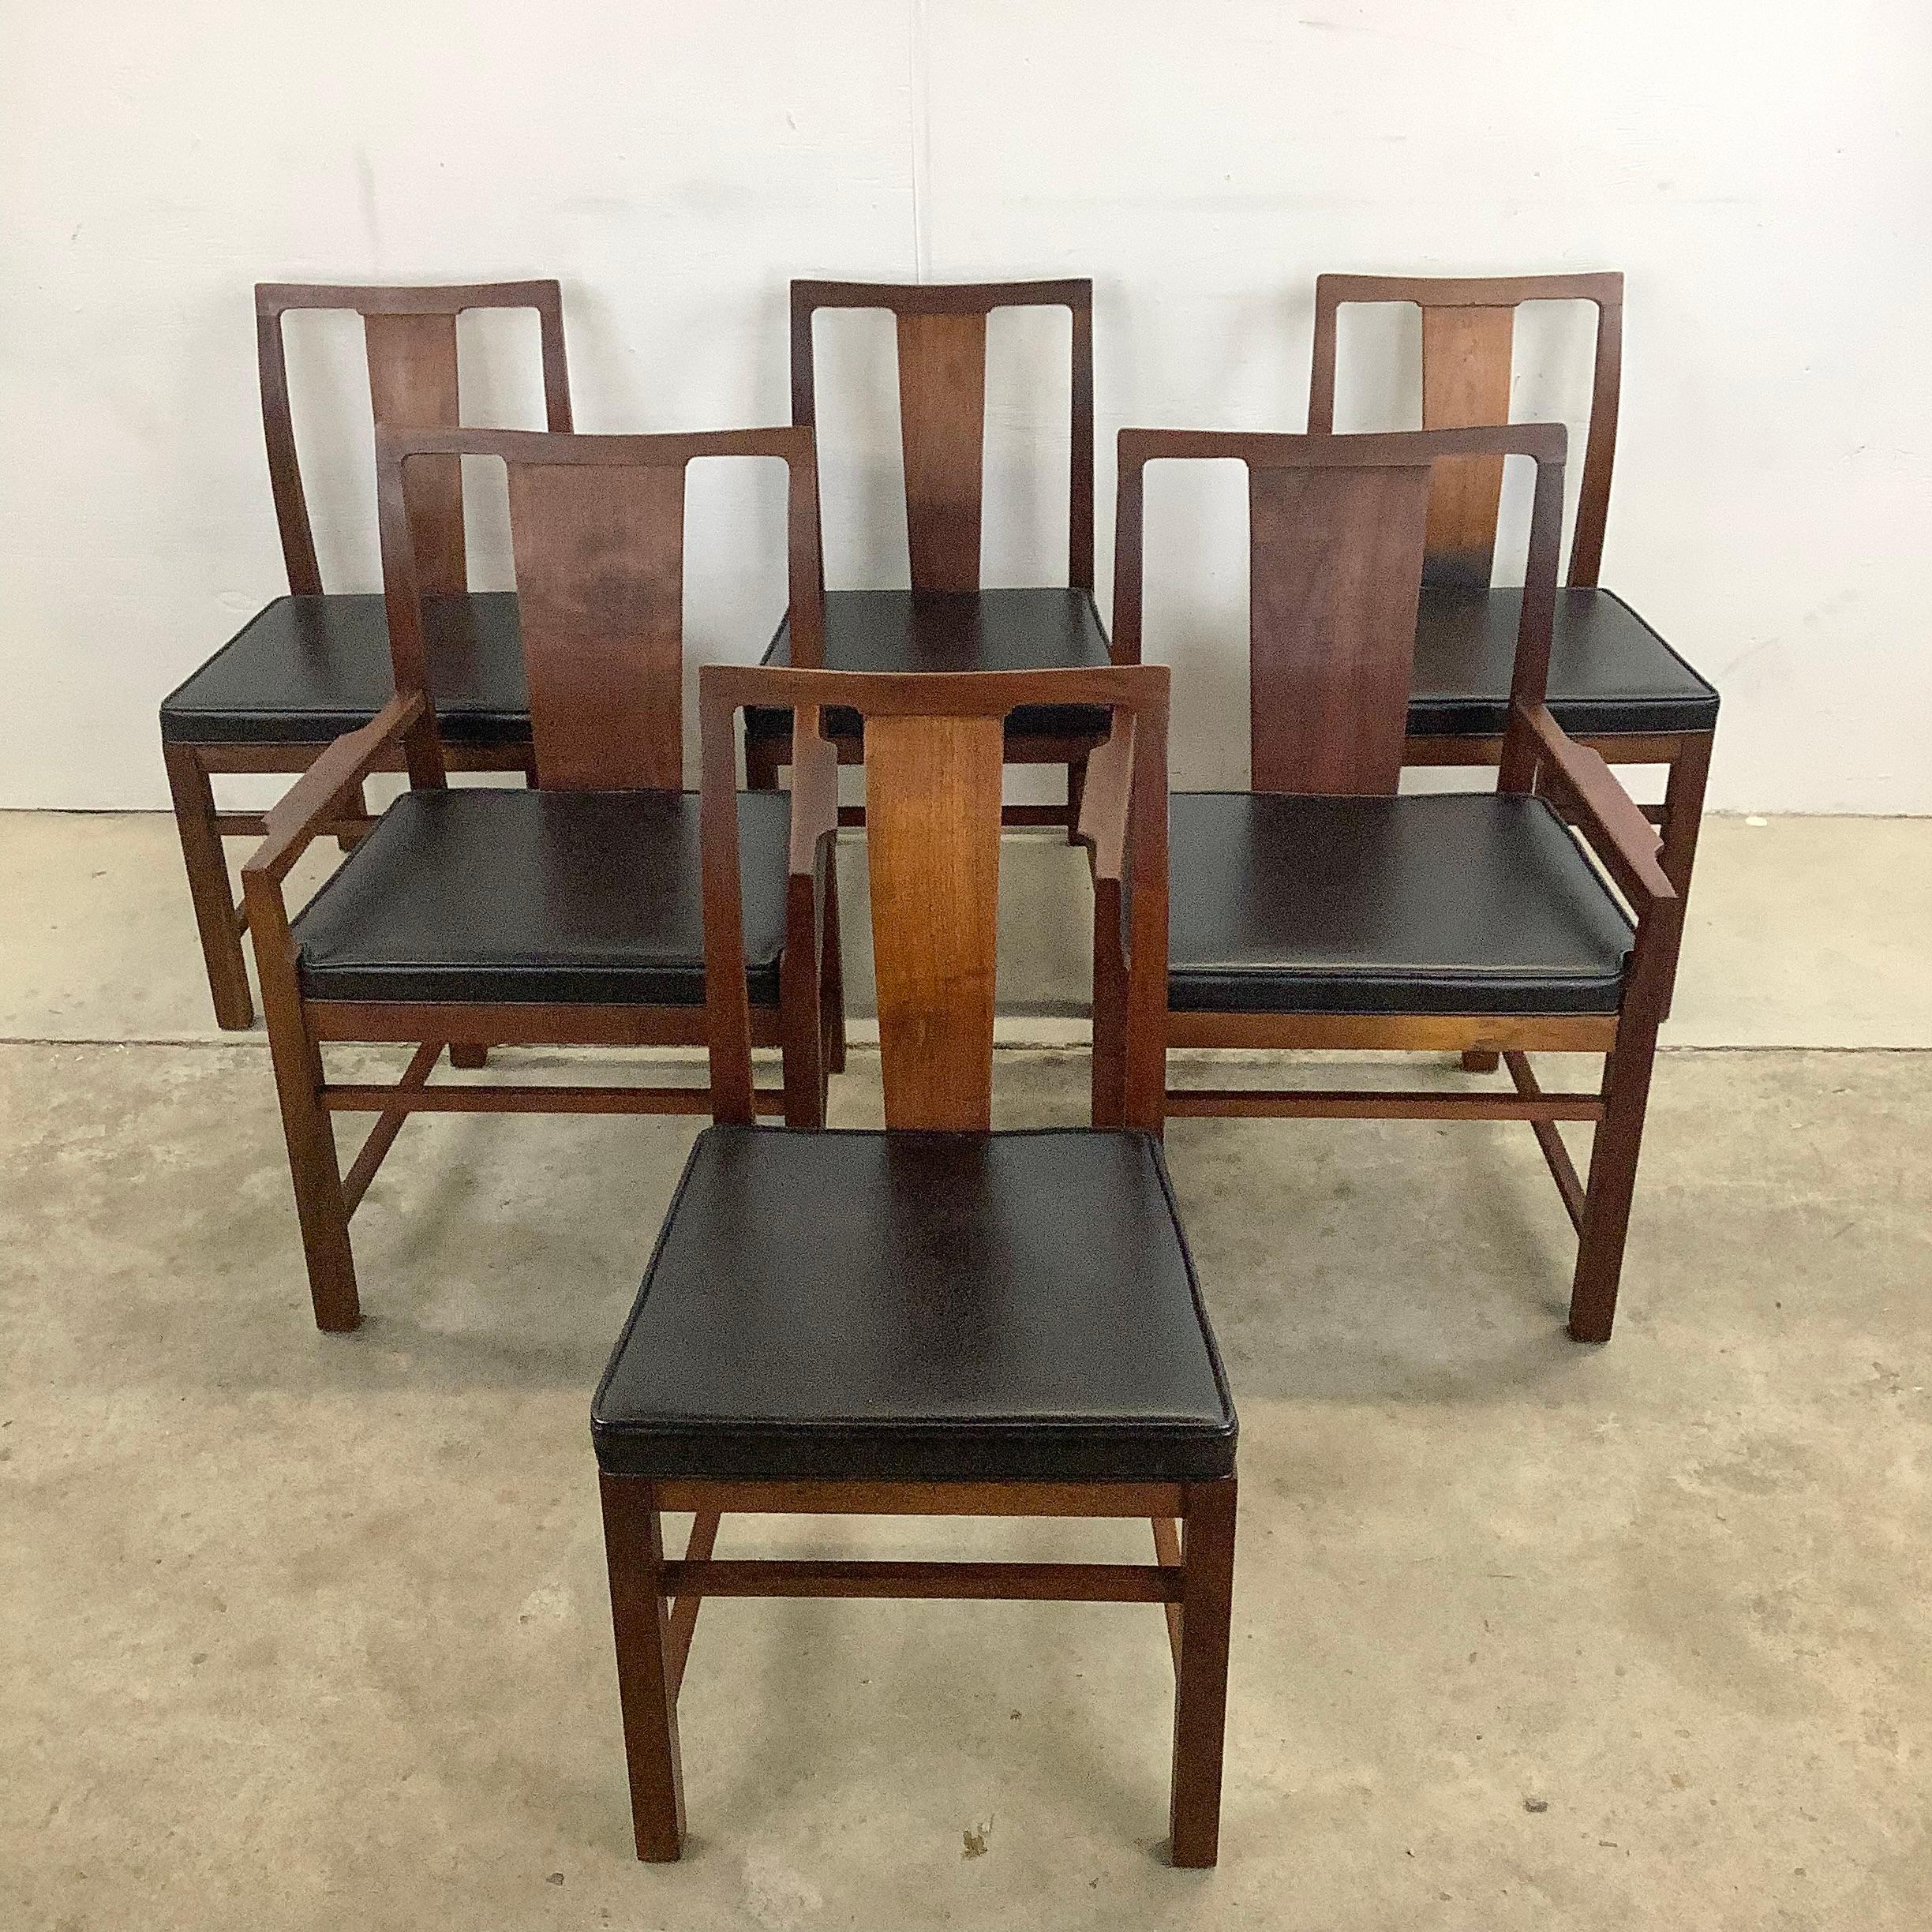 This sturdy and stylish set of six mid-century modern dining chairs from Hibriten manufacturing make a comfortable mcm style addition to any dining set. The dark walnut finish is wonderfully complimented by wide black naugahyde style seats, with